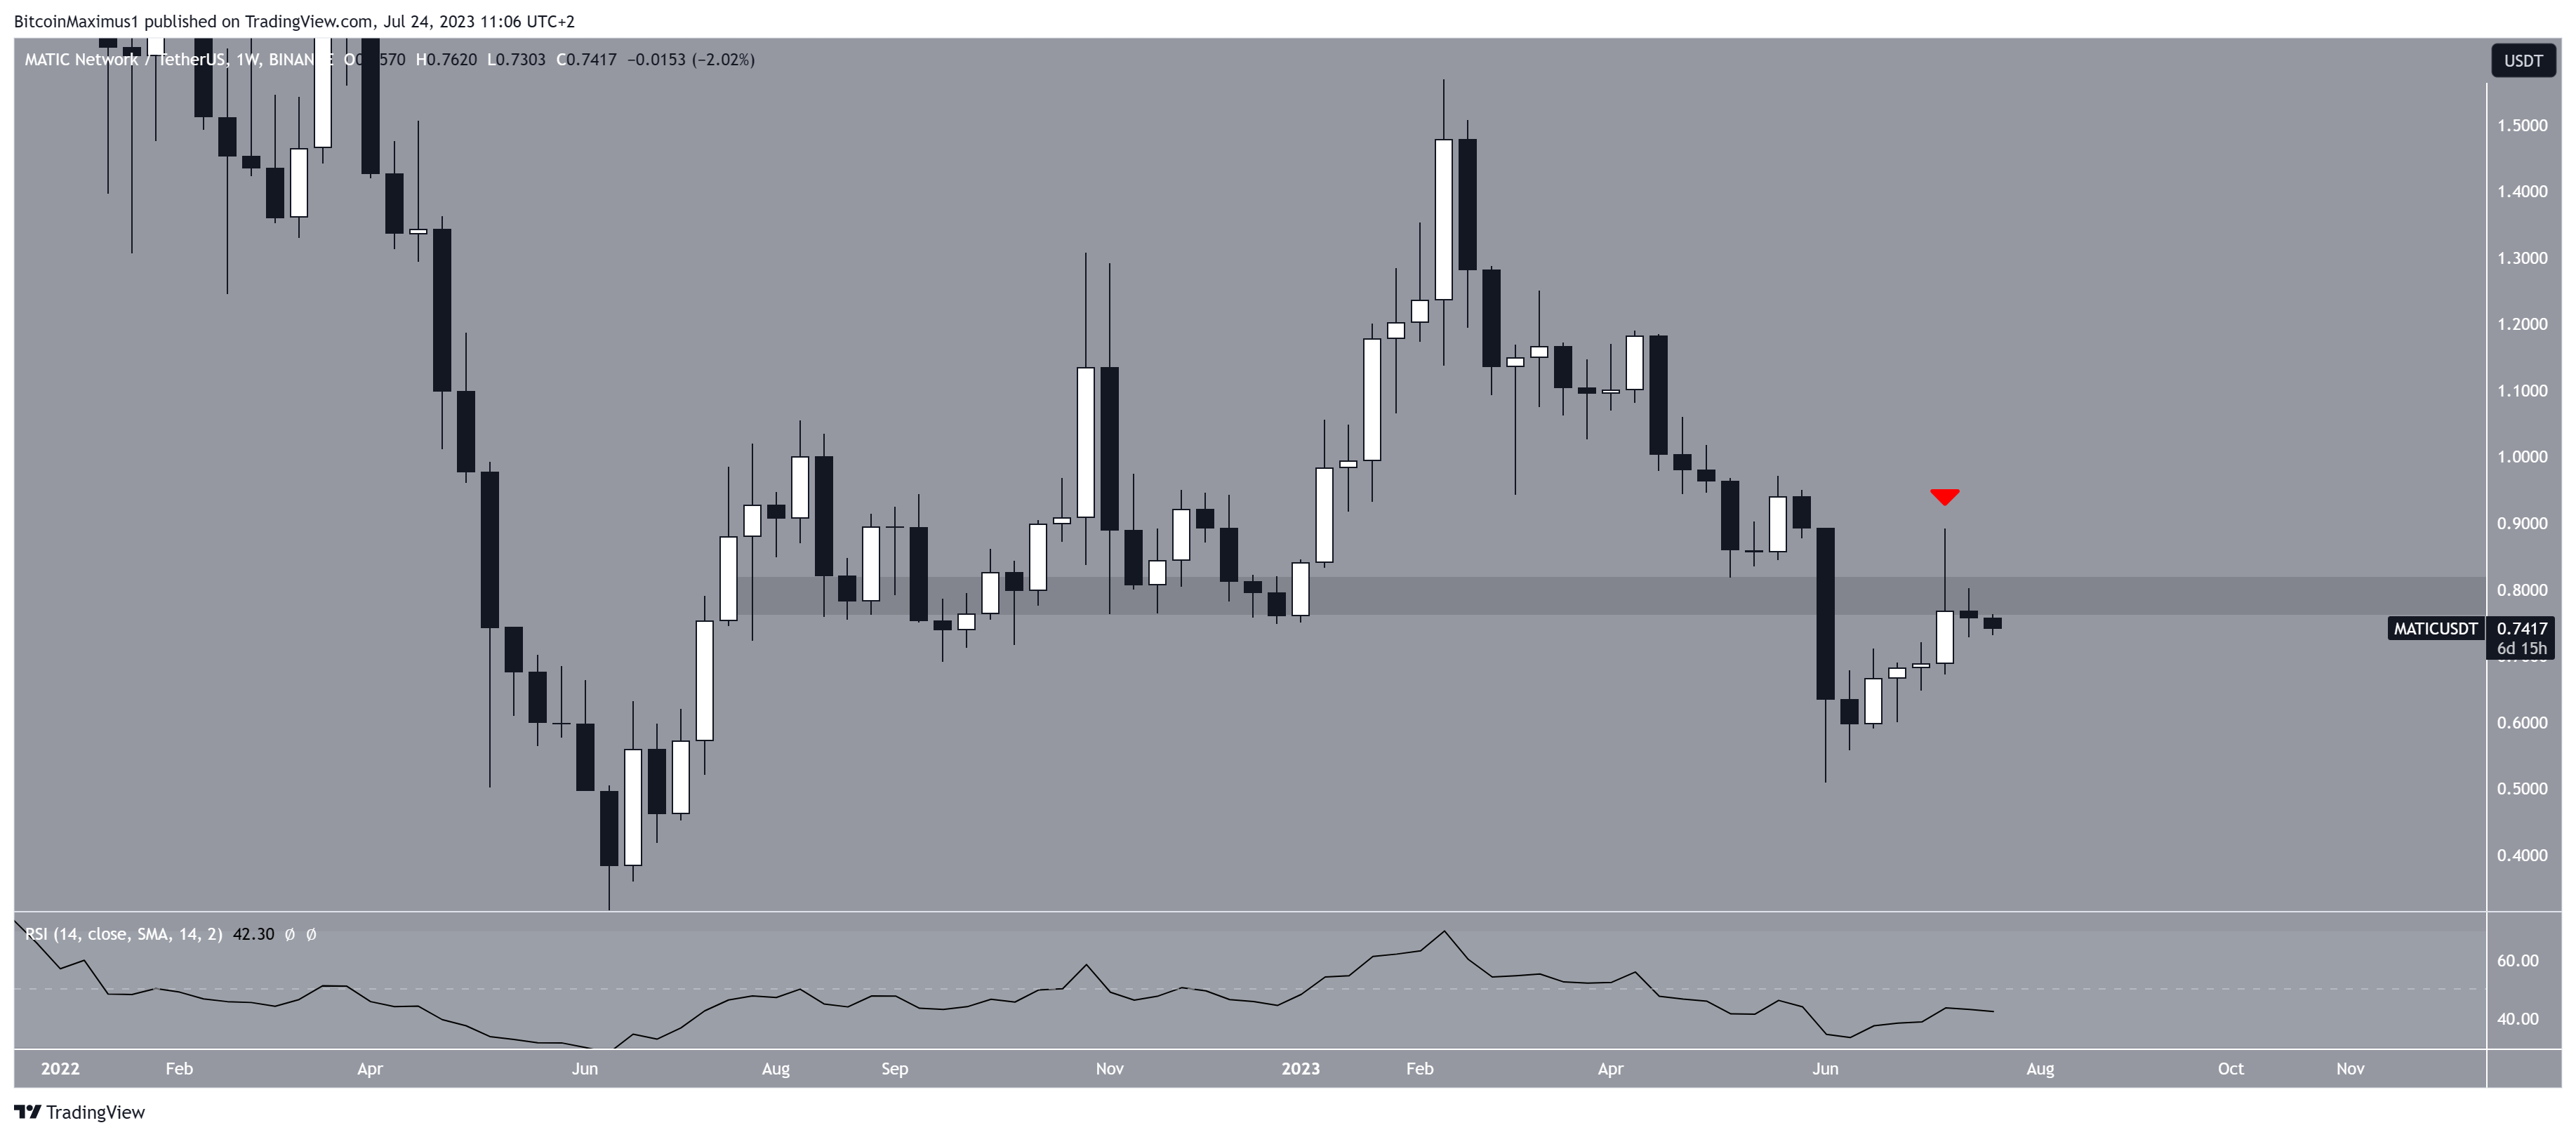 MATIC/USDT Daily Chart. Source: TradingView